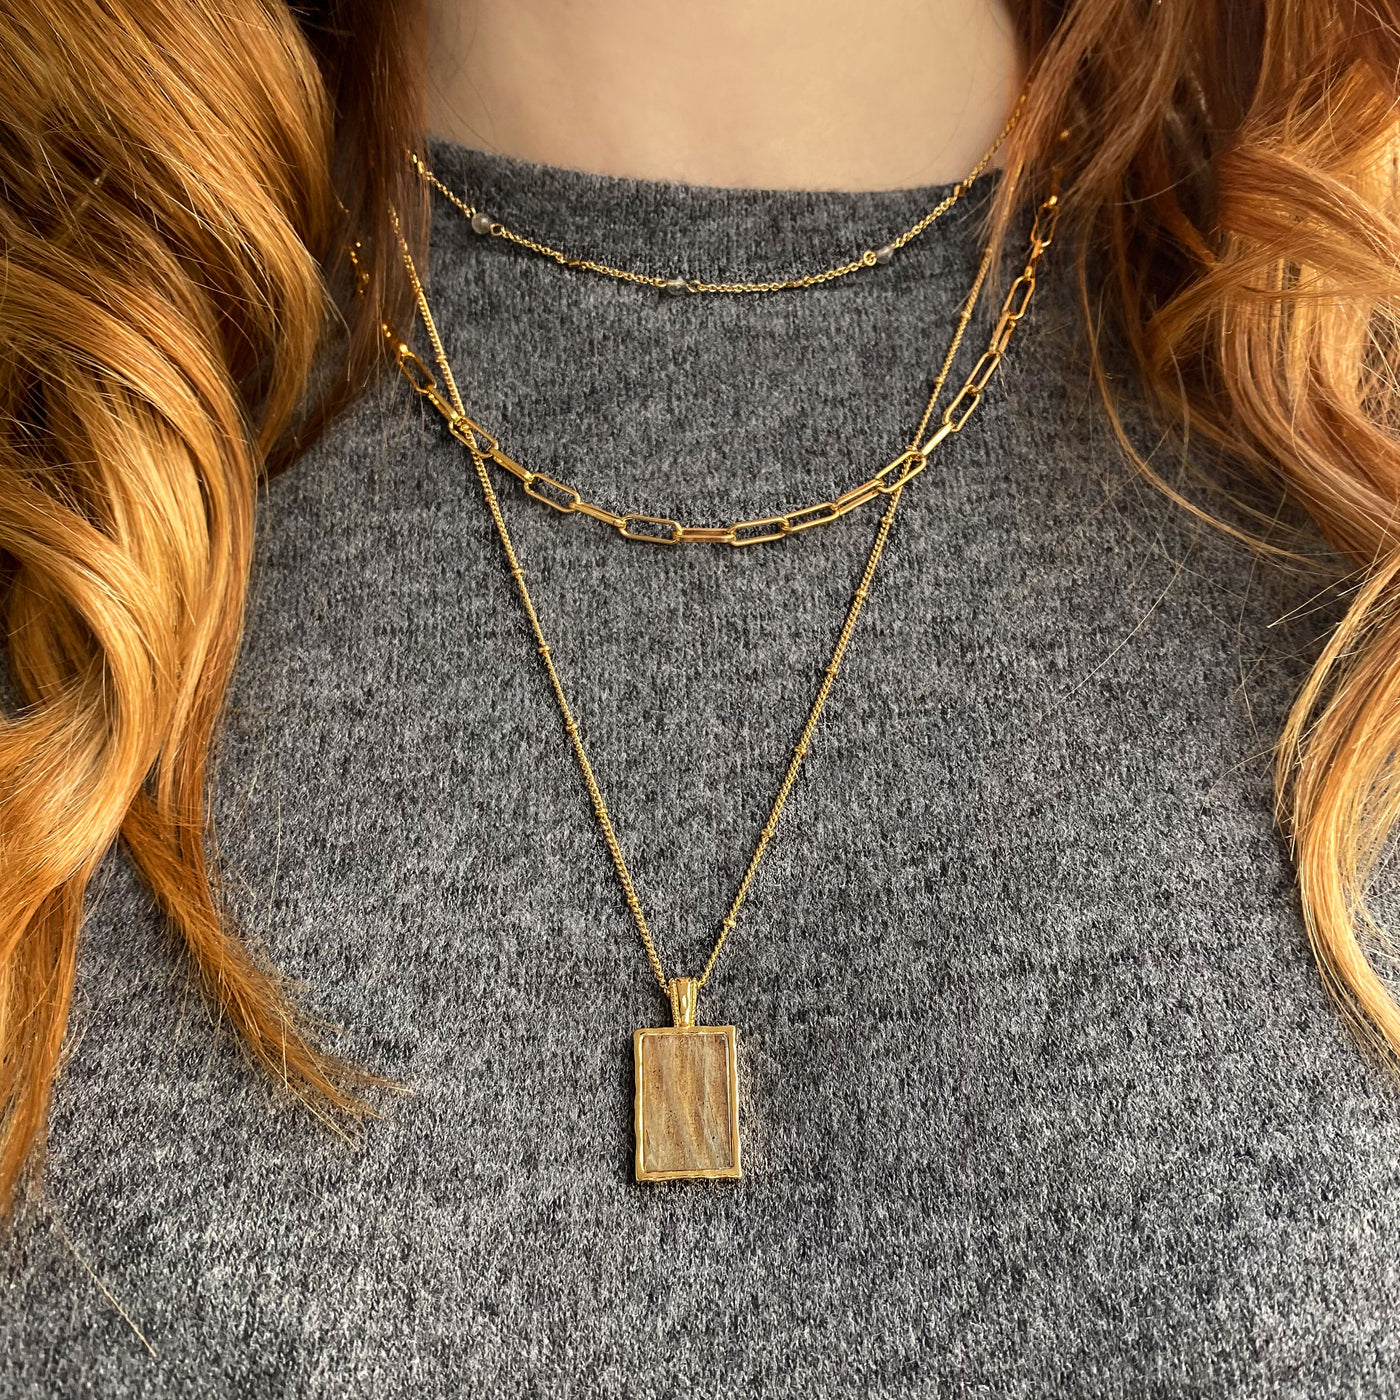 Gold layered necklaces with labradorite choker, plain chunky chain and labradorite rectangle pendant on bobble chain